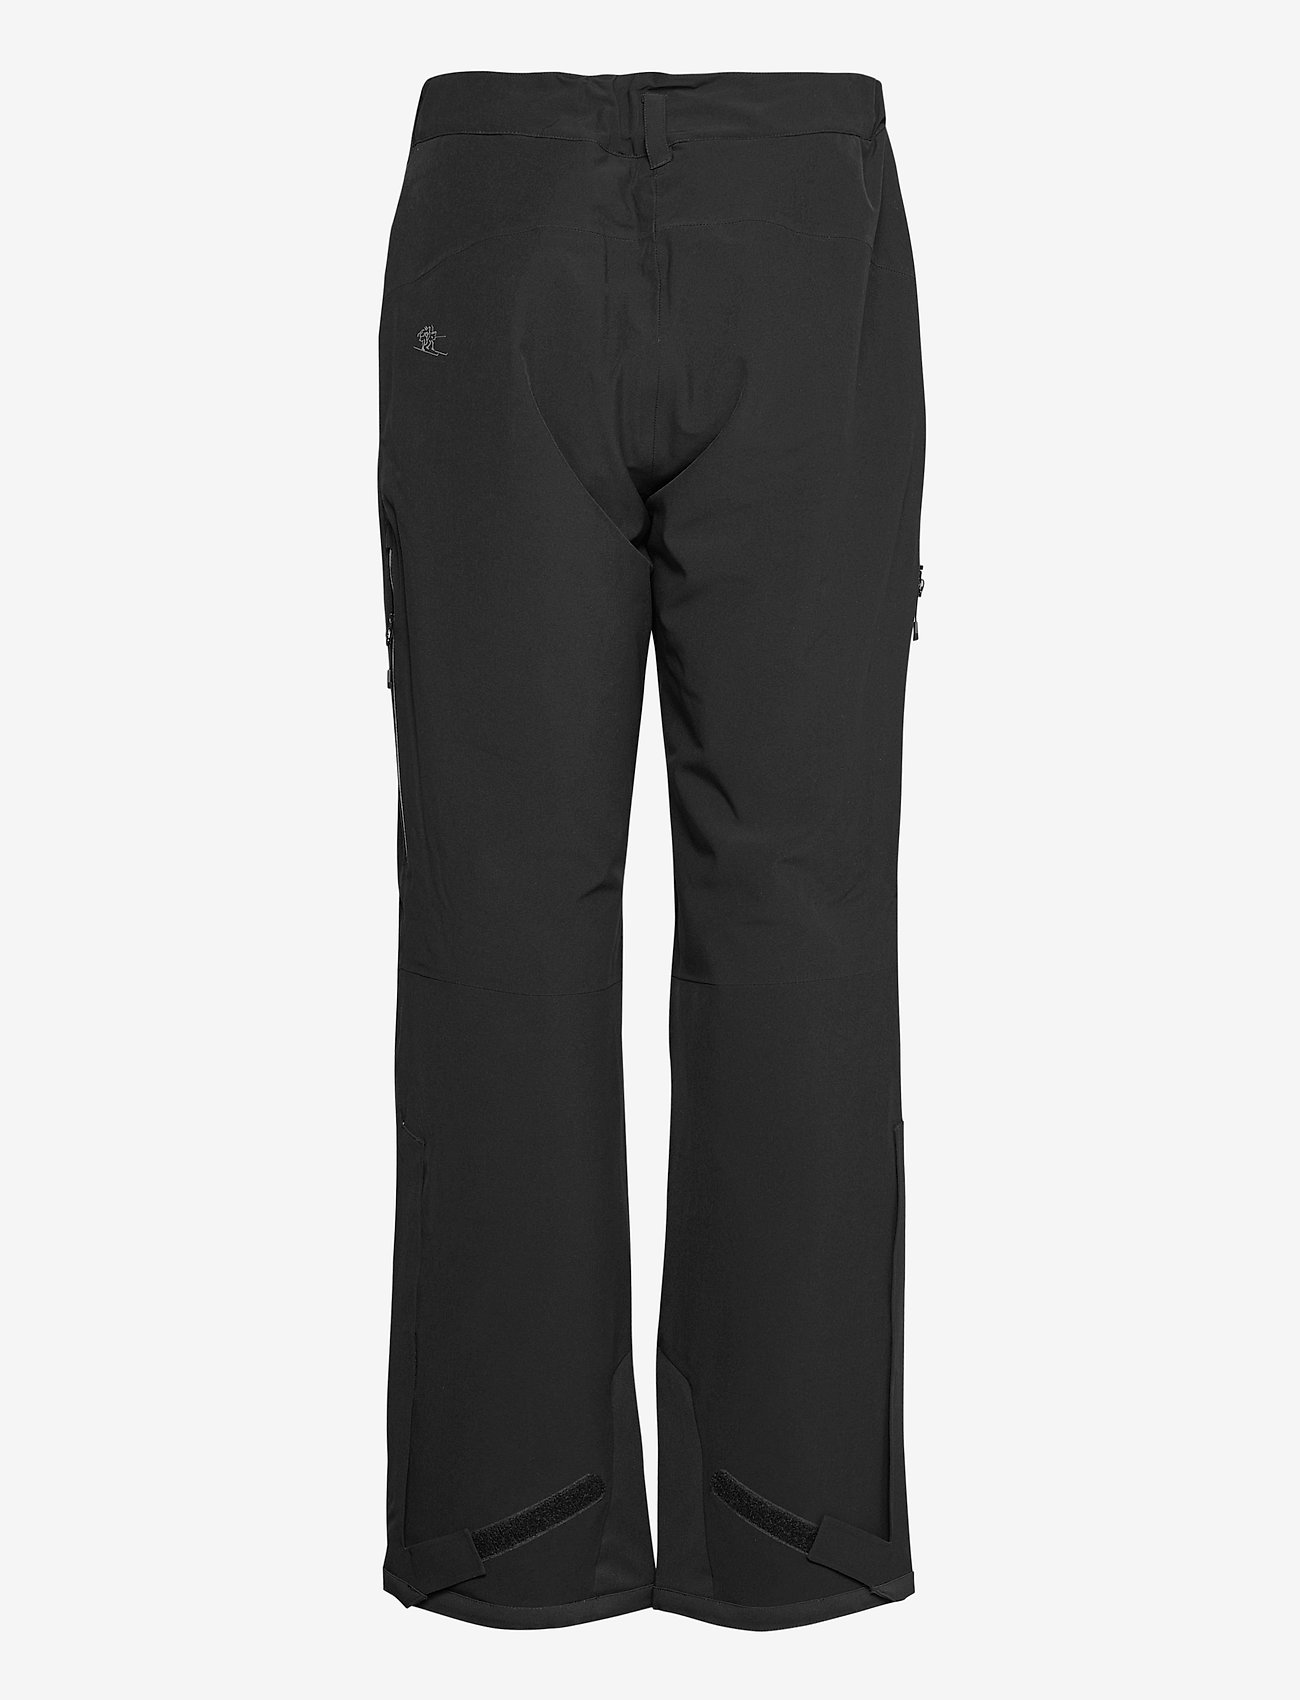 Bergans - Oppdal Insulated Lady Pants - black / solid charcoal - 1